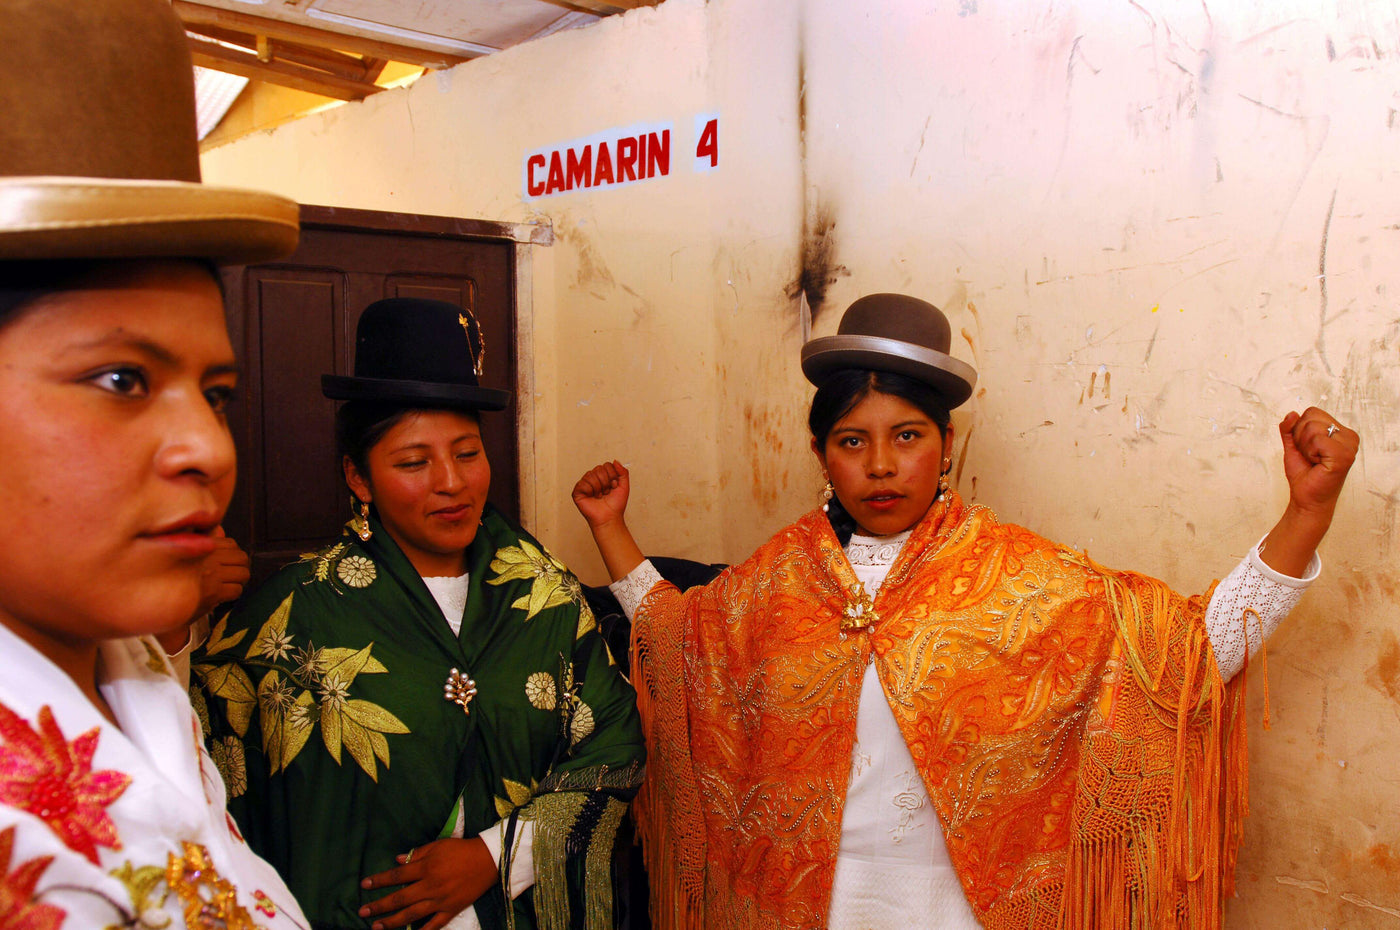 three luchadoras 'cholas' in traditional indigenous outfits and traditional bowler hats